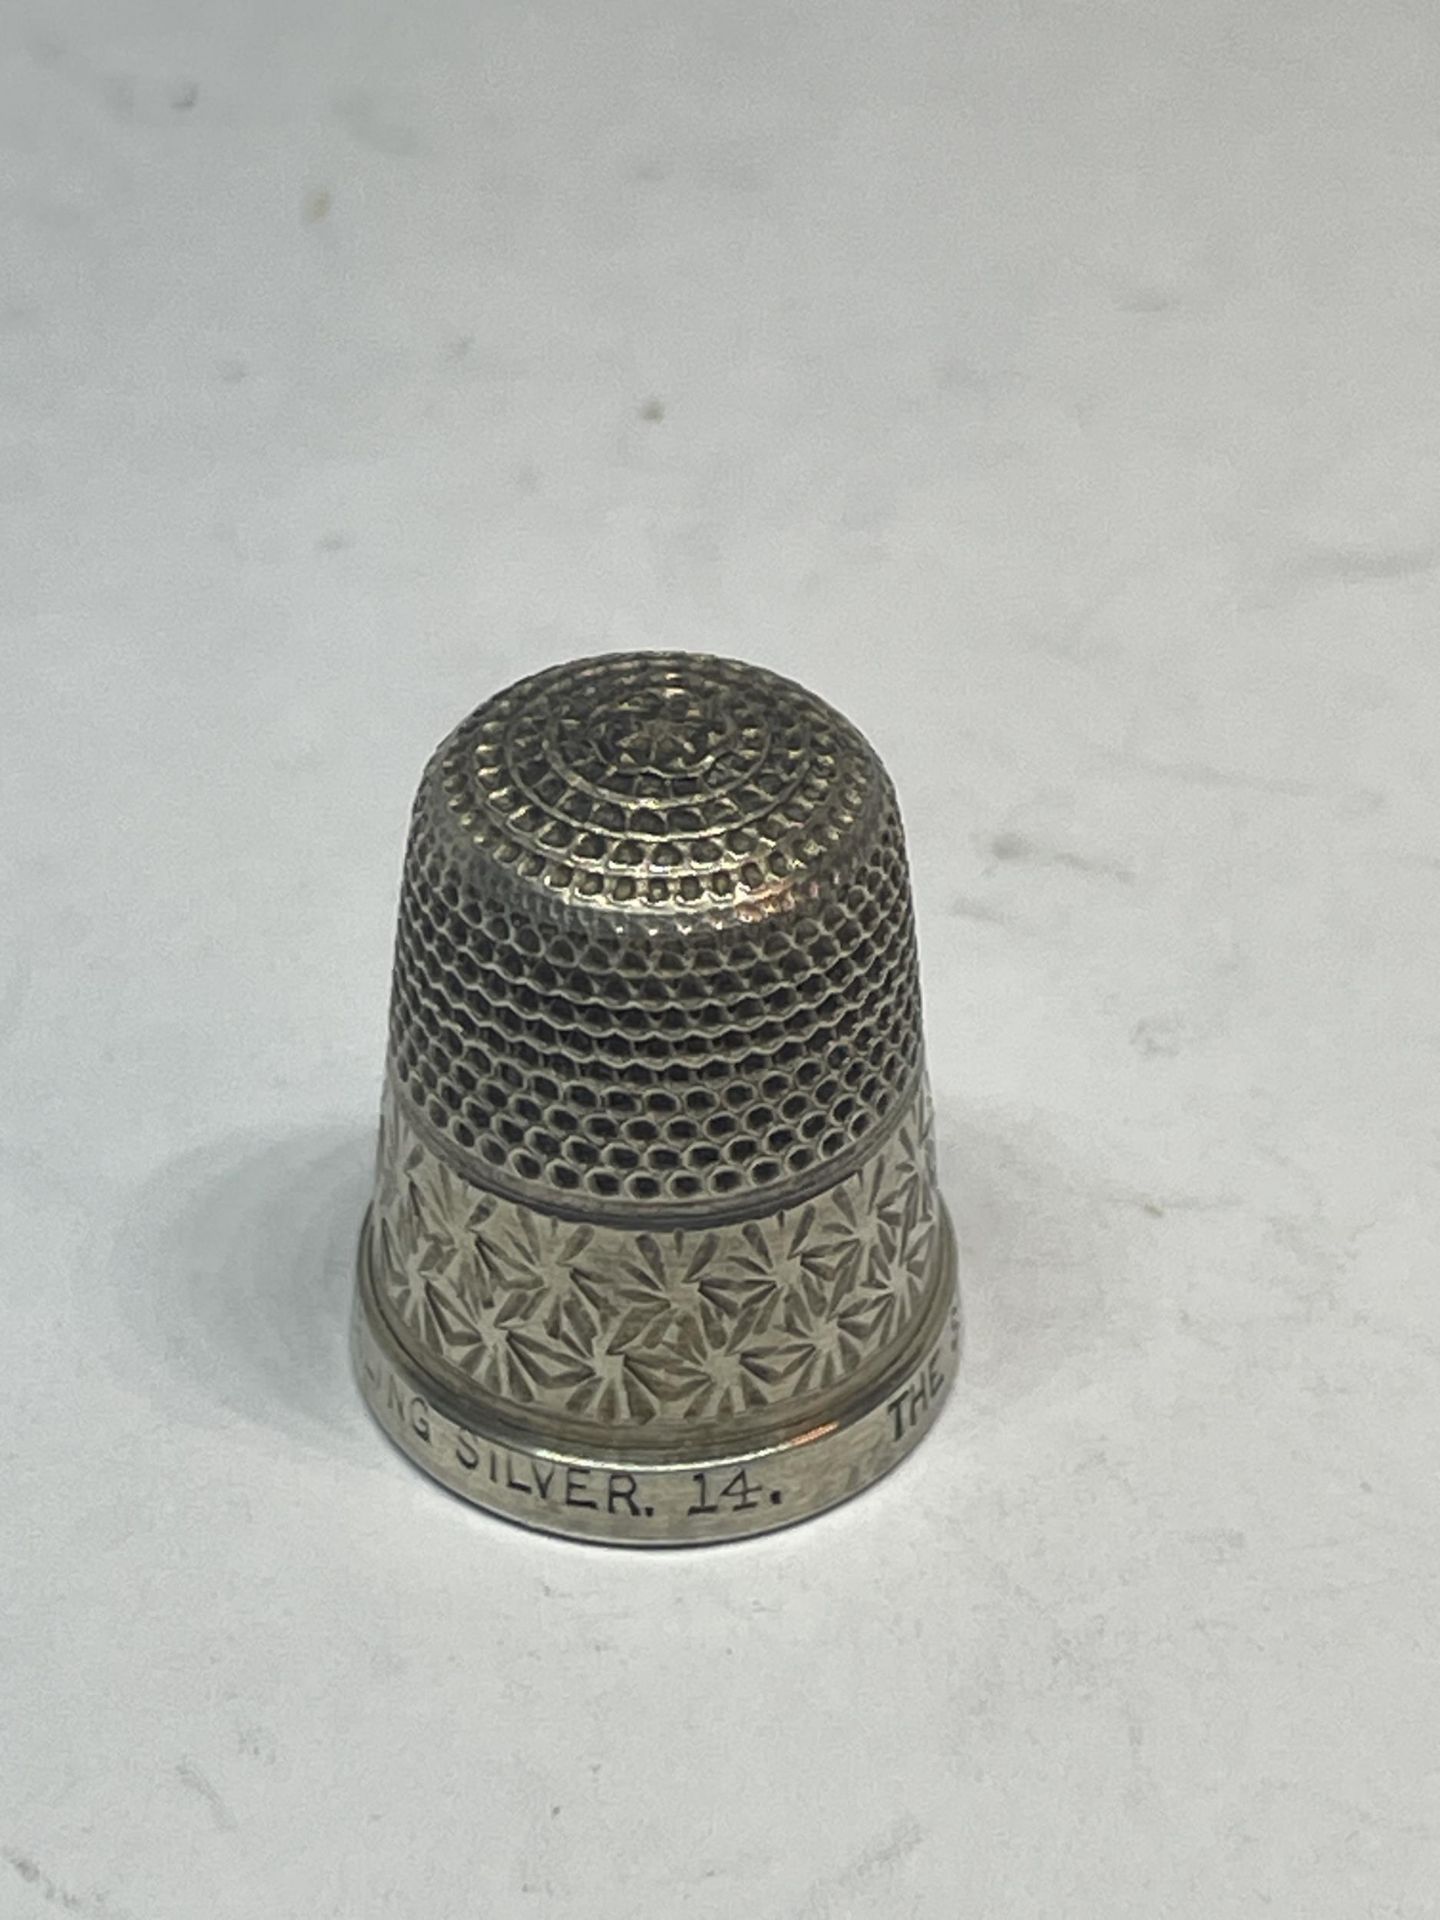 A MARKED STERLING SILVER THE SPA THIMBLE